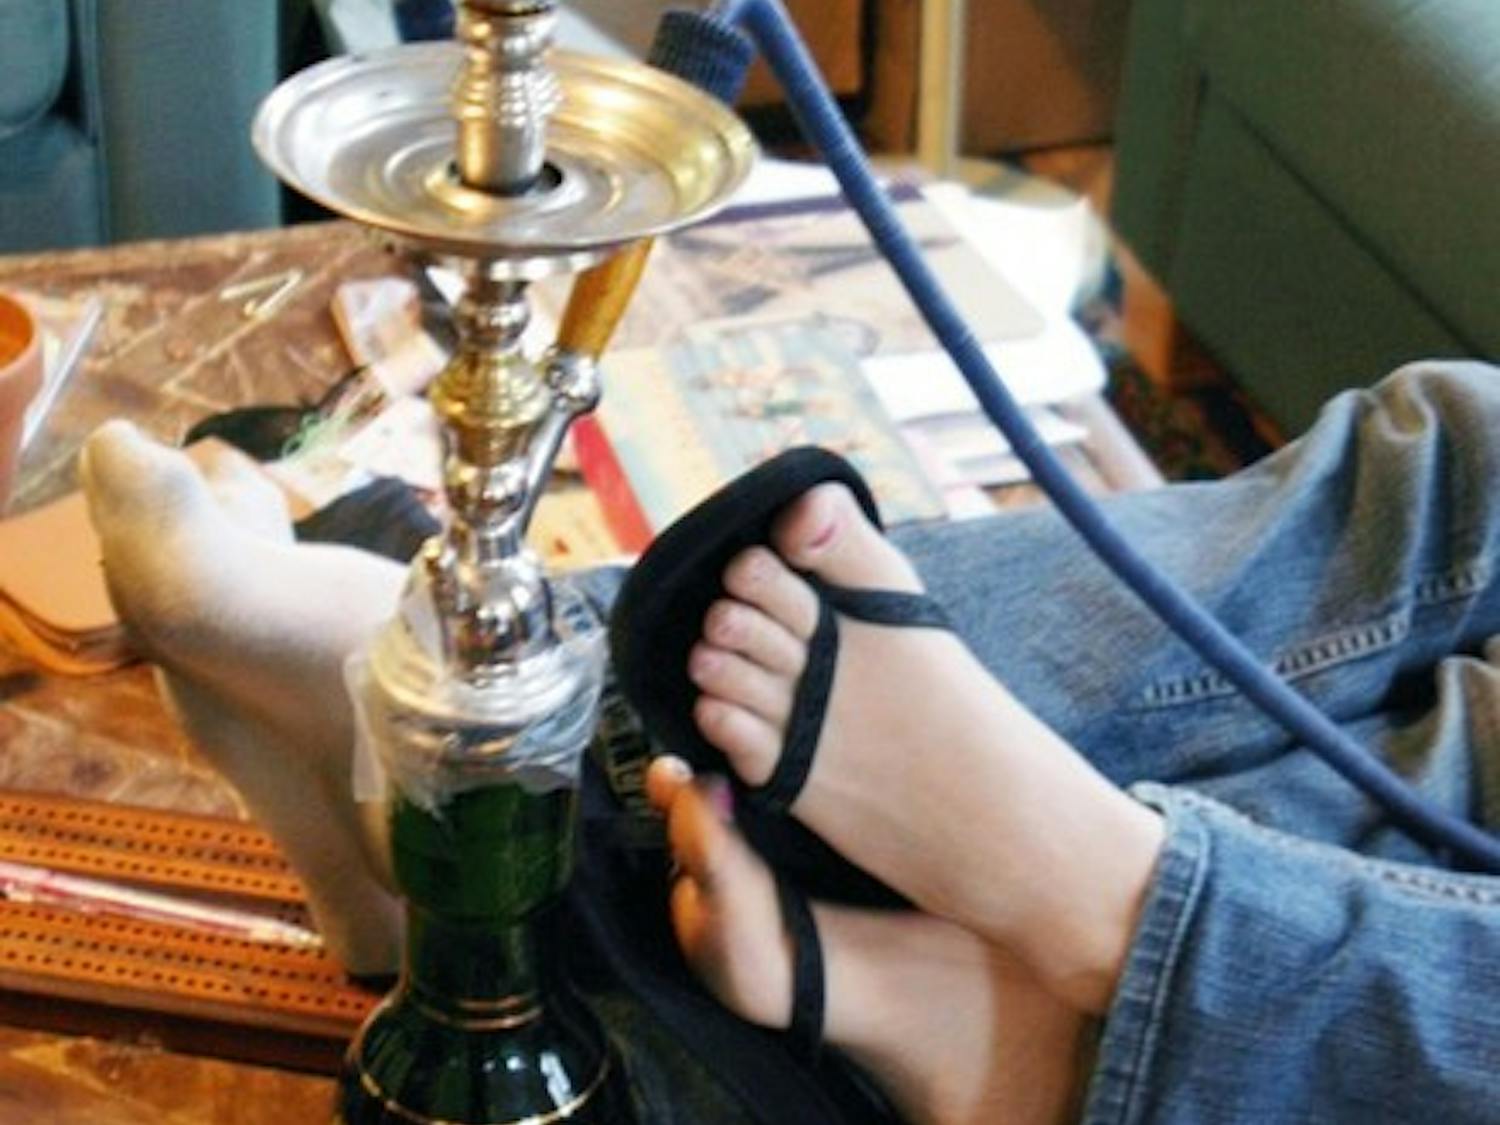 Students above enjoy a hookah, joining a rapidly growing population of Dartmouth students and Upper Valley residents who have made smoking sheesha more popular recently.